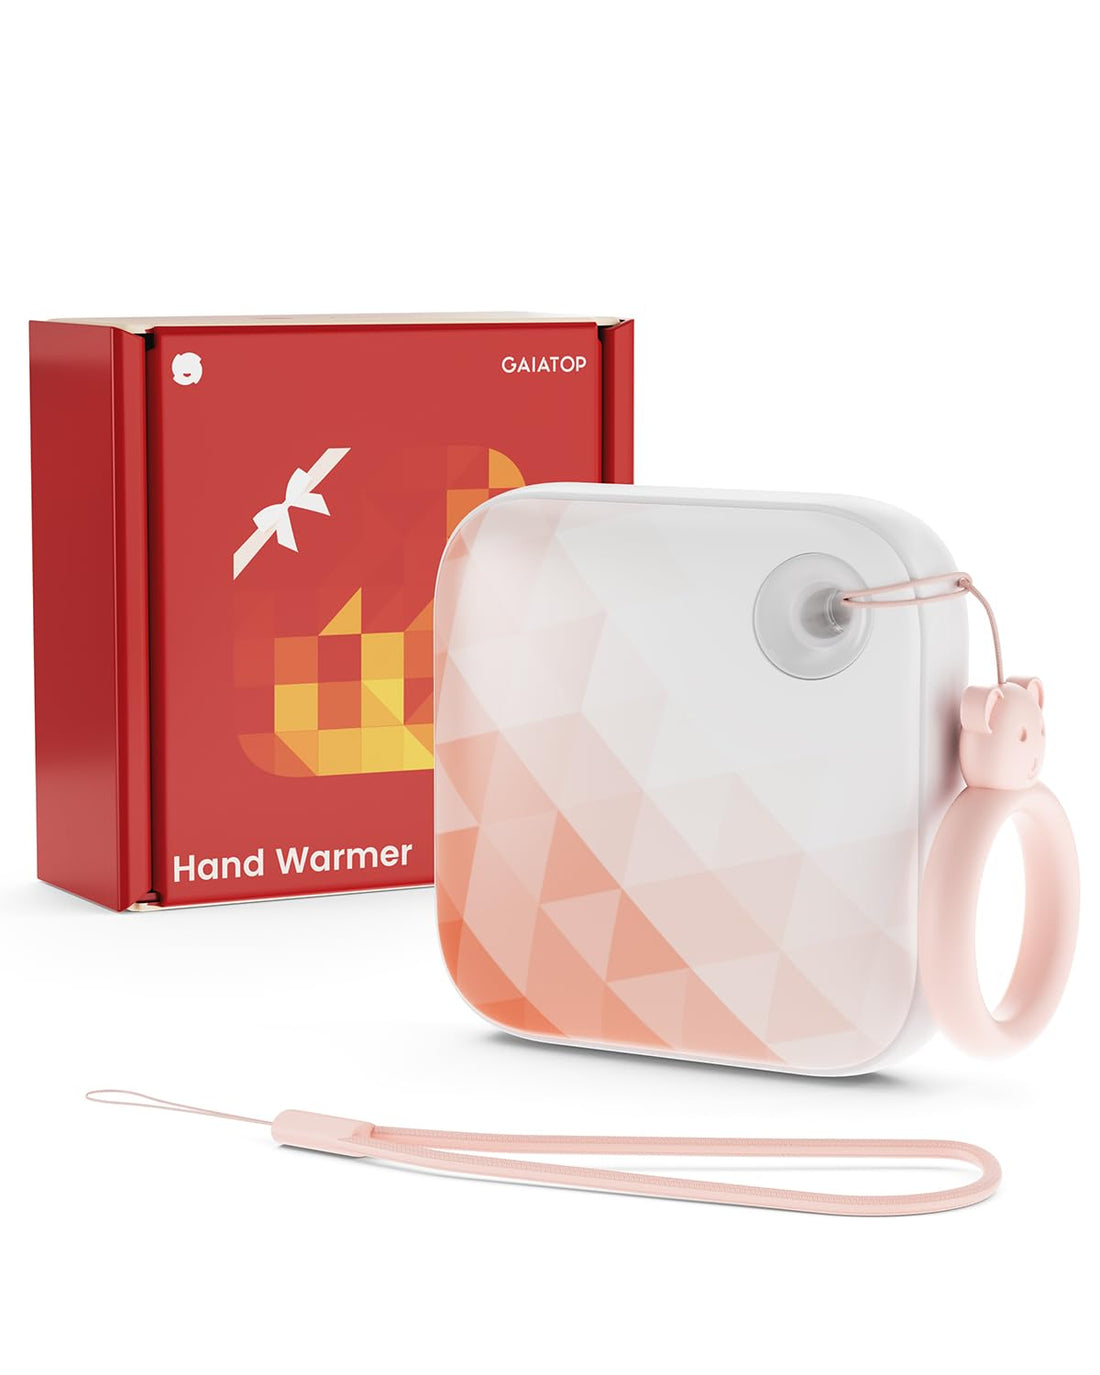 Gaiatop Hand Warmers 𝐑𝐞𝐜𝐡𝐚𝐫𝐠𝐞𝐚𝐛𝐥𝐞, Electric Hand Warmer with 𝐋𝐢𝐠𝐡𝐭 & 𝟐 𝐒𝐭𝐫𝐚𝐩𝐬, Double-Sided Warming Pocket Heater Reusable Portable Hot Hands Hand Warmers Gifts for Women Men